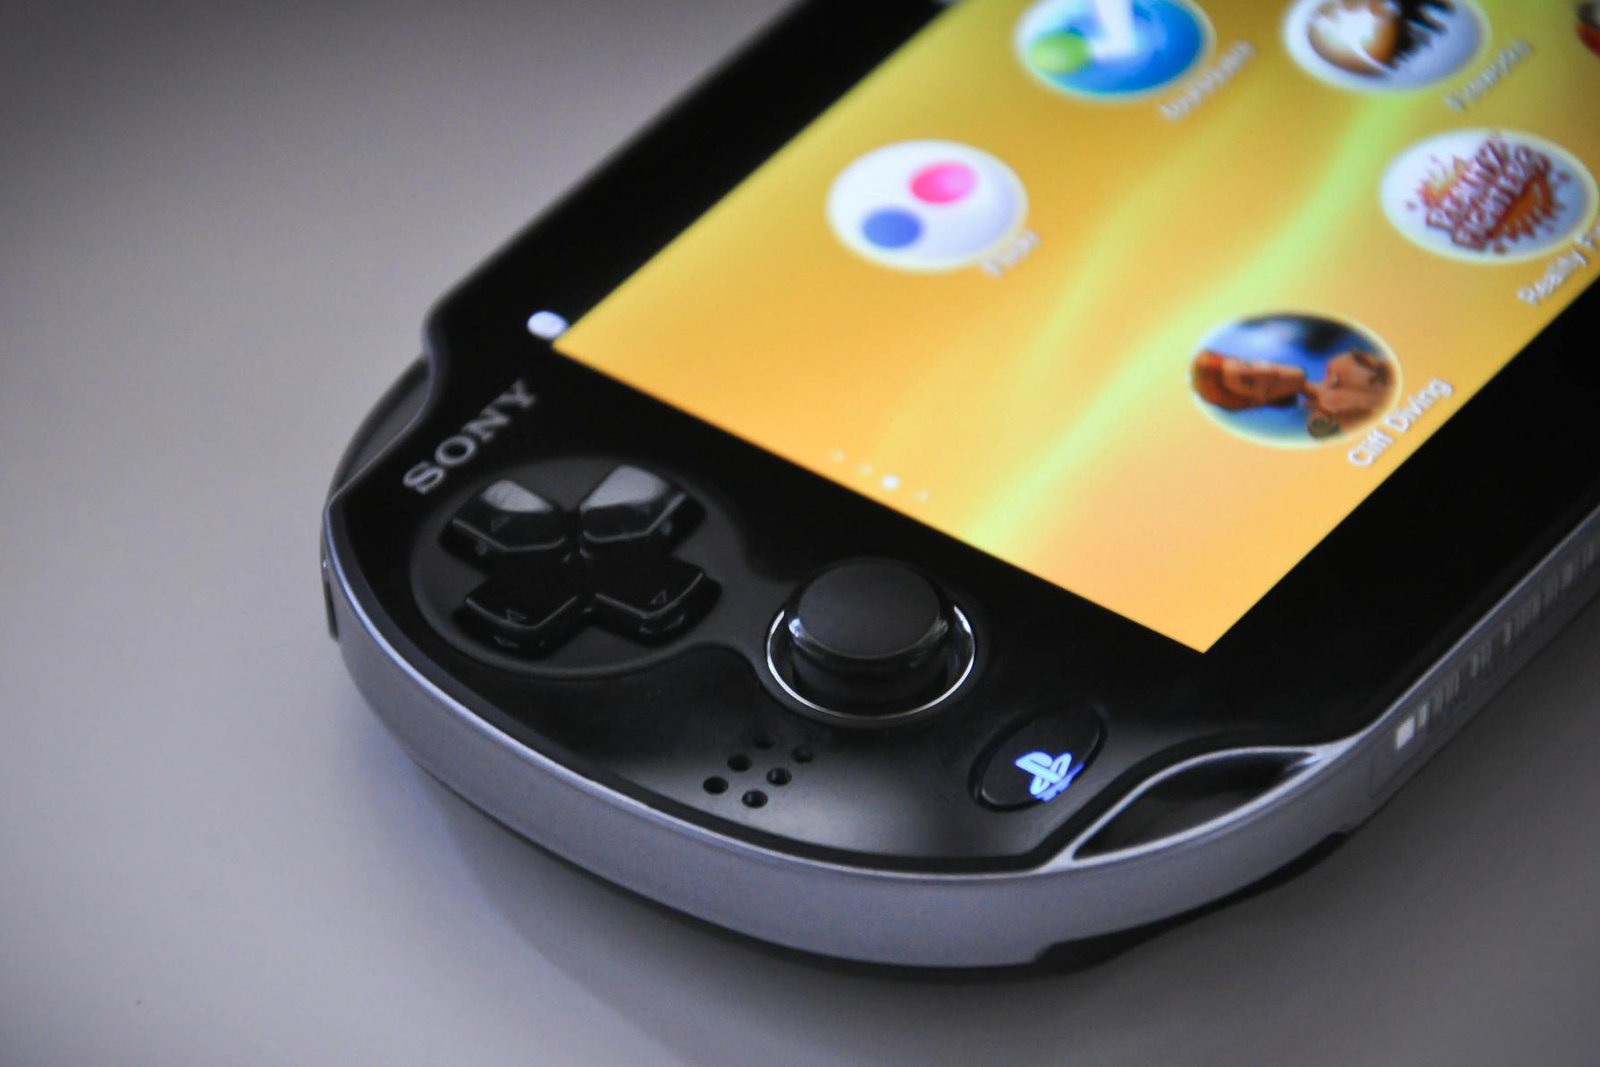 Games on the PlayStation Vita and where Sony went wrong